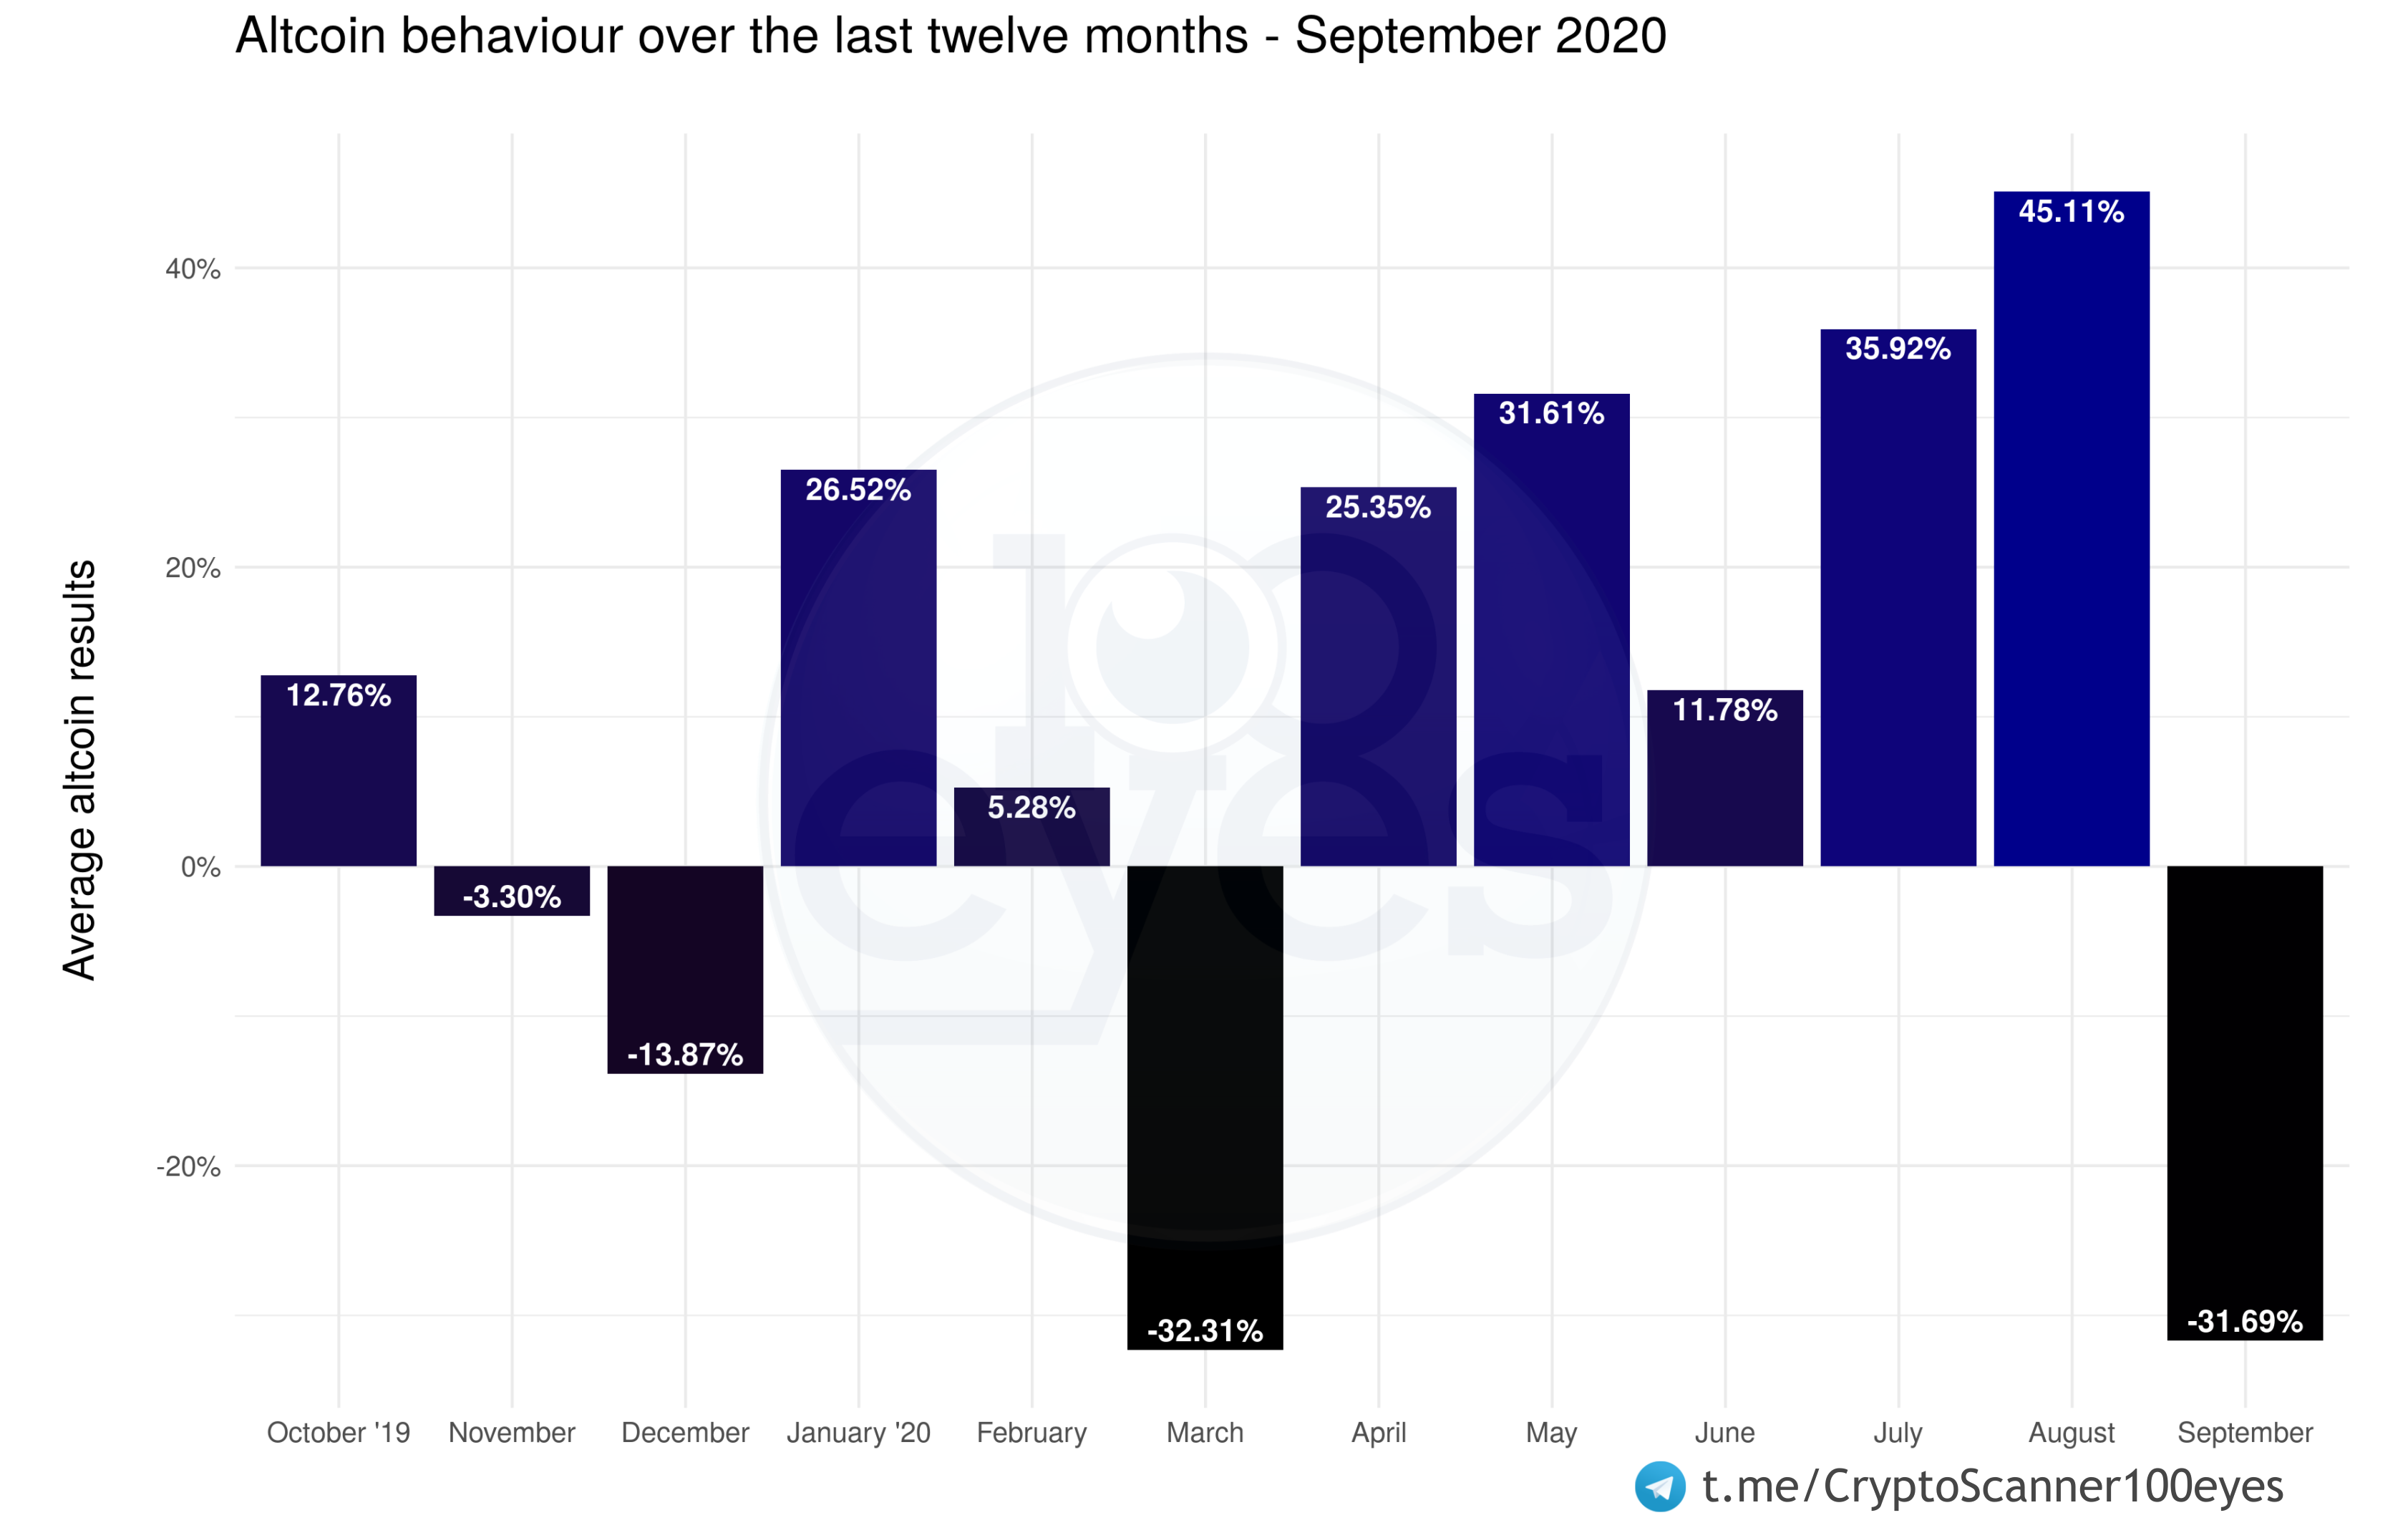 July and August were fantastic for both Bitcoin and the altcoin market. Unfortunately, it had to end in September…